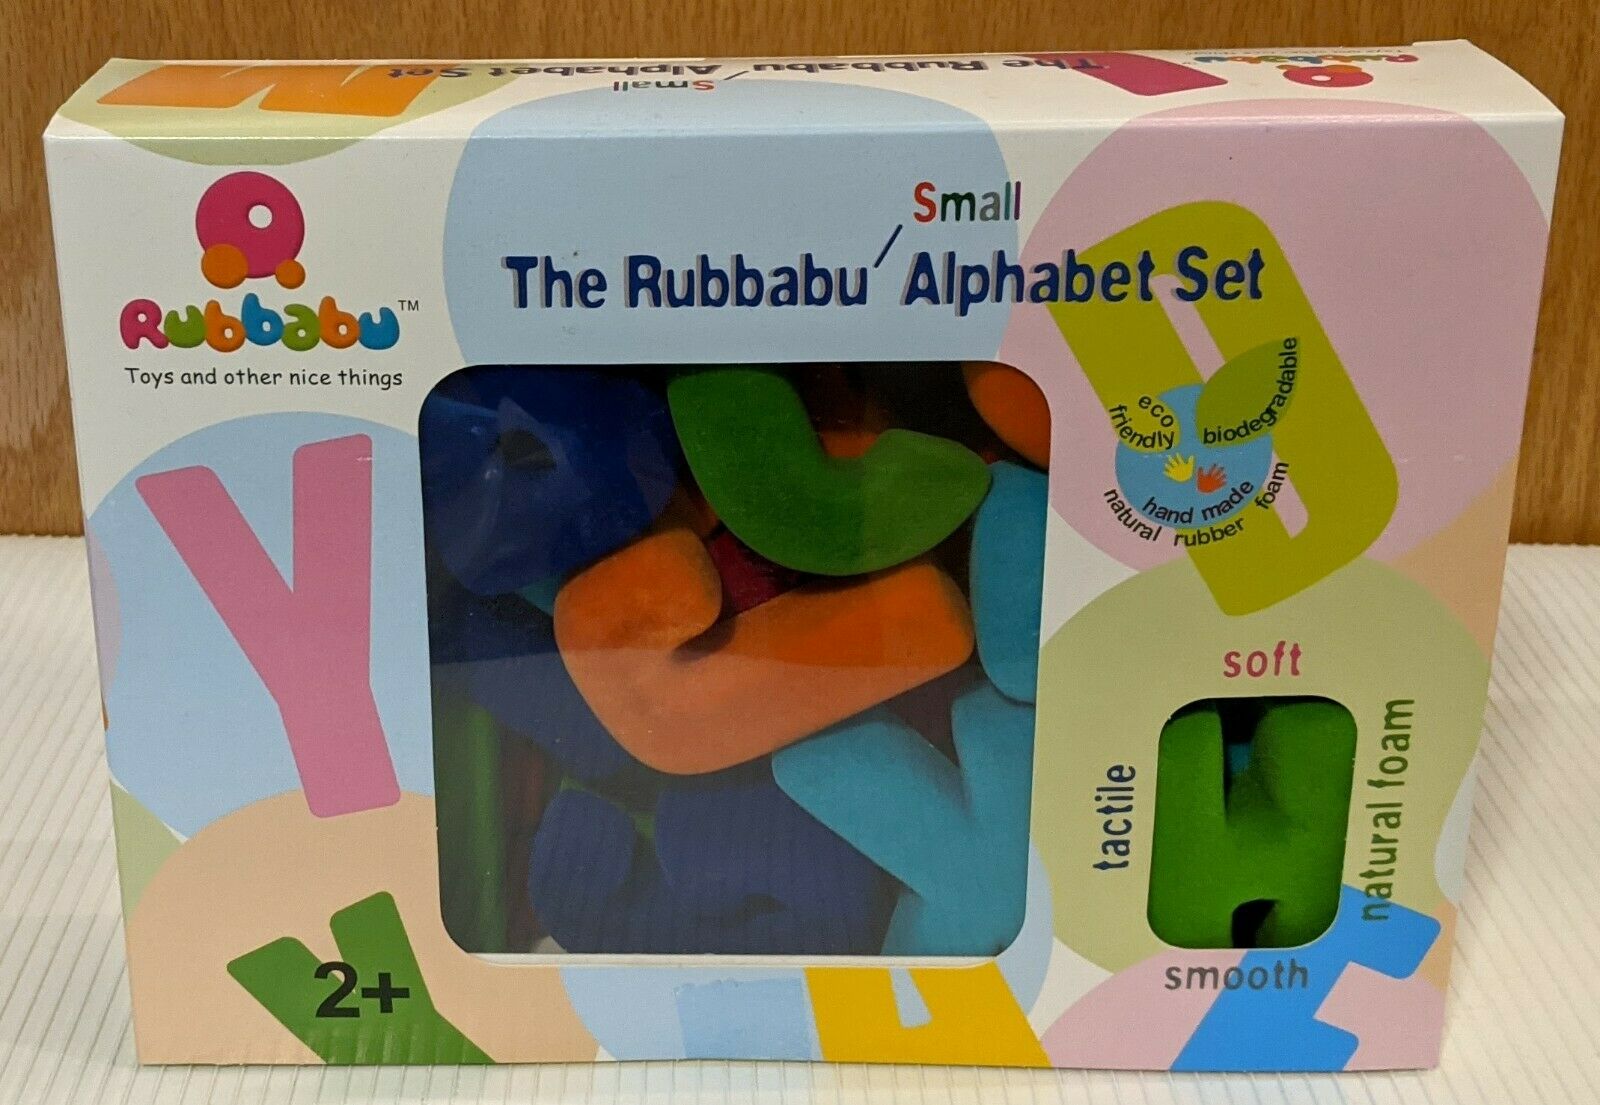 20100 - Rubbabu Small Alphabet Set - 26 Colorful Uppercase Letters - Ages 2+